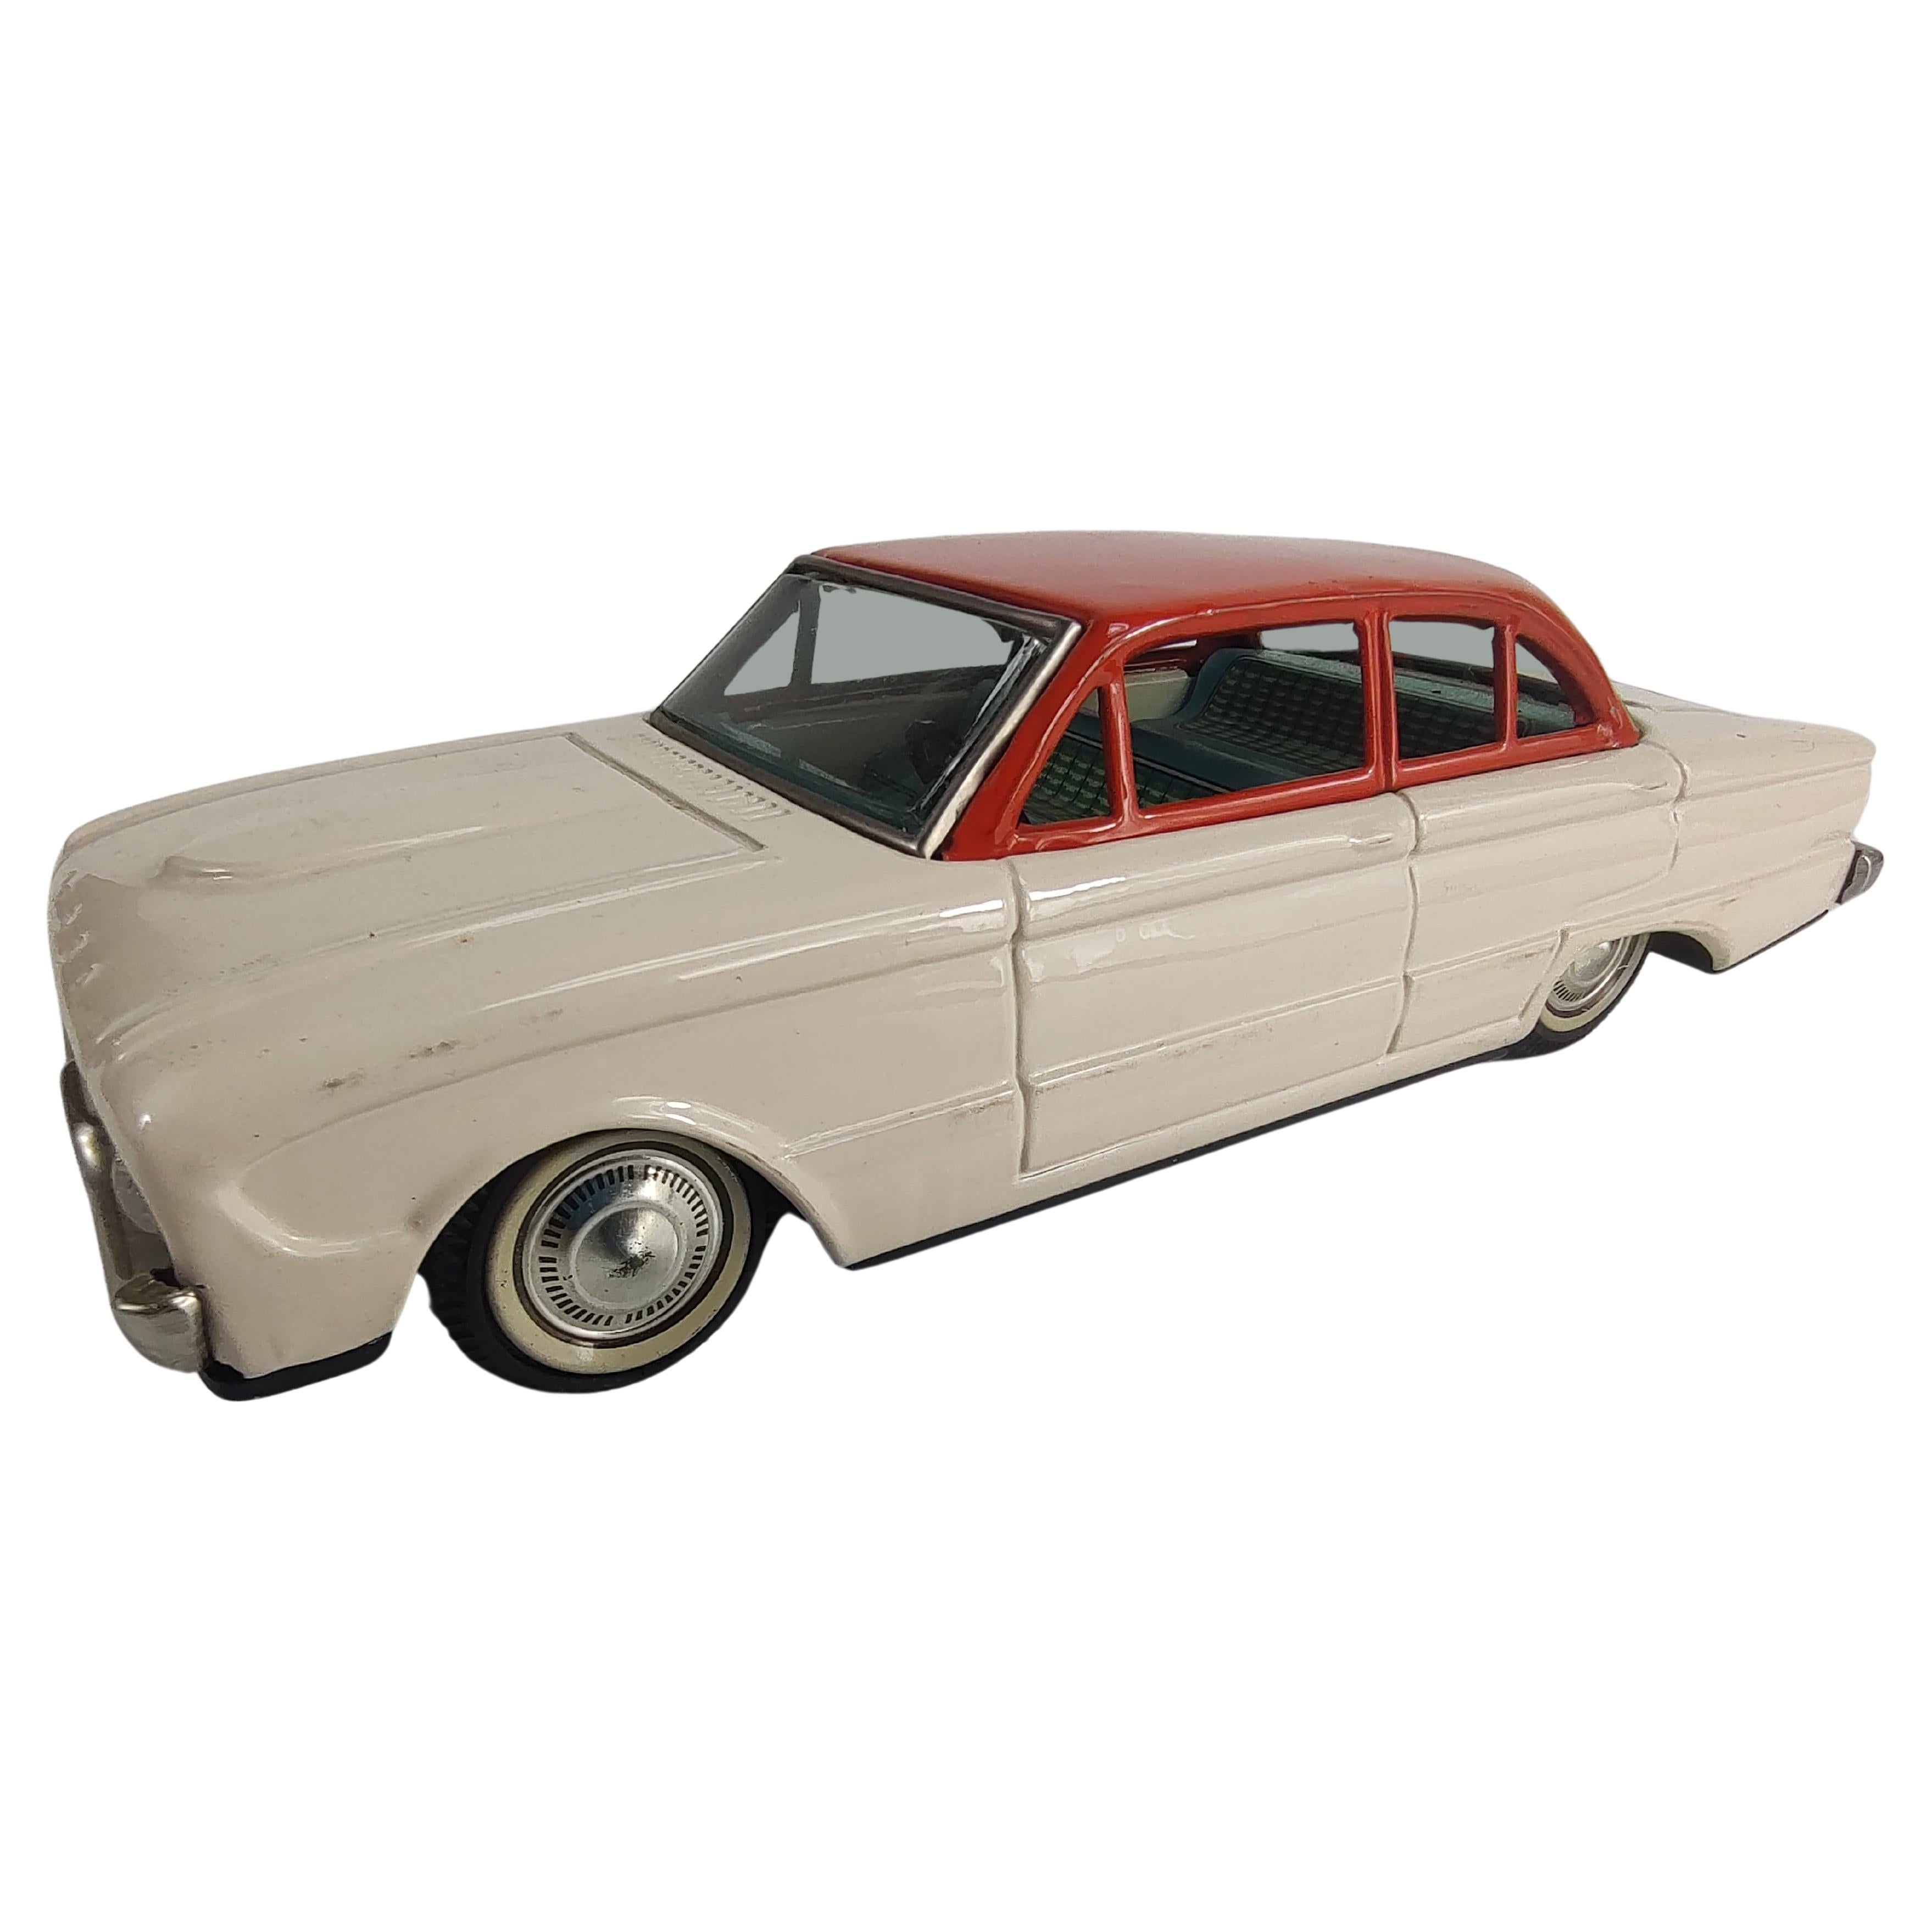 Mid Century Japanese Tin Litho Toy Car Ford Falcon Friction C1960 For Sale 2